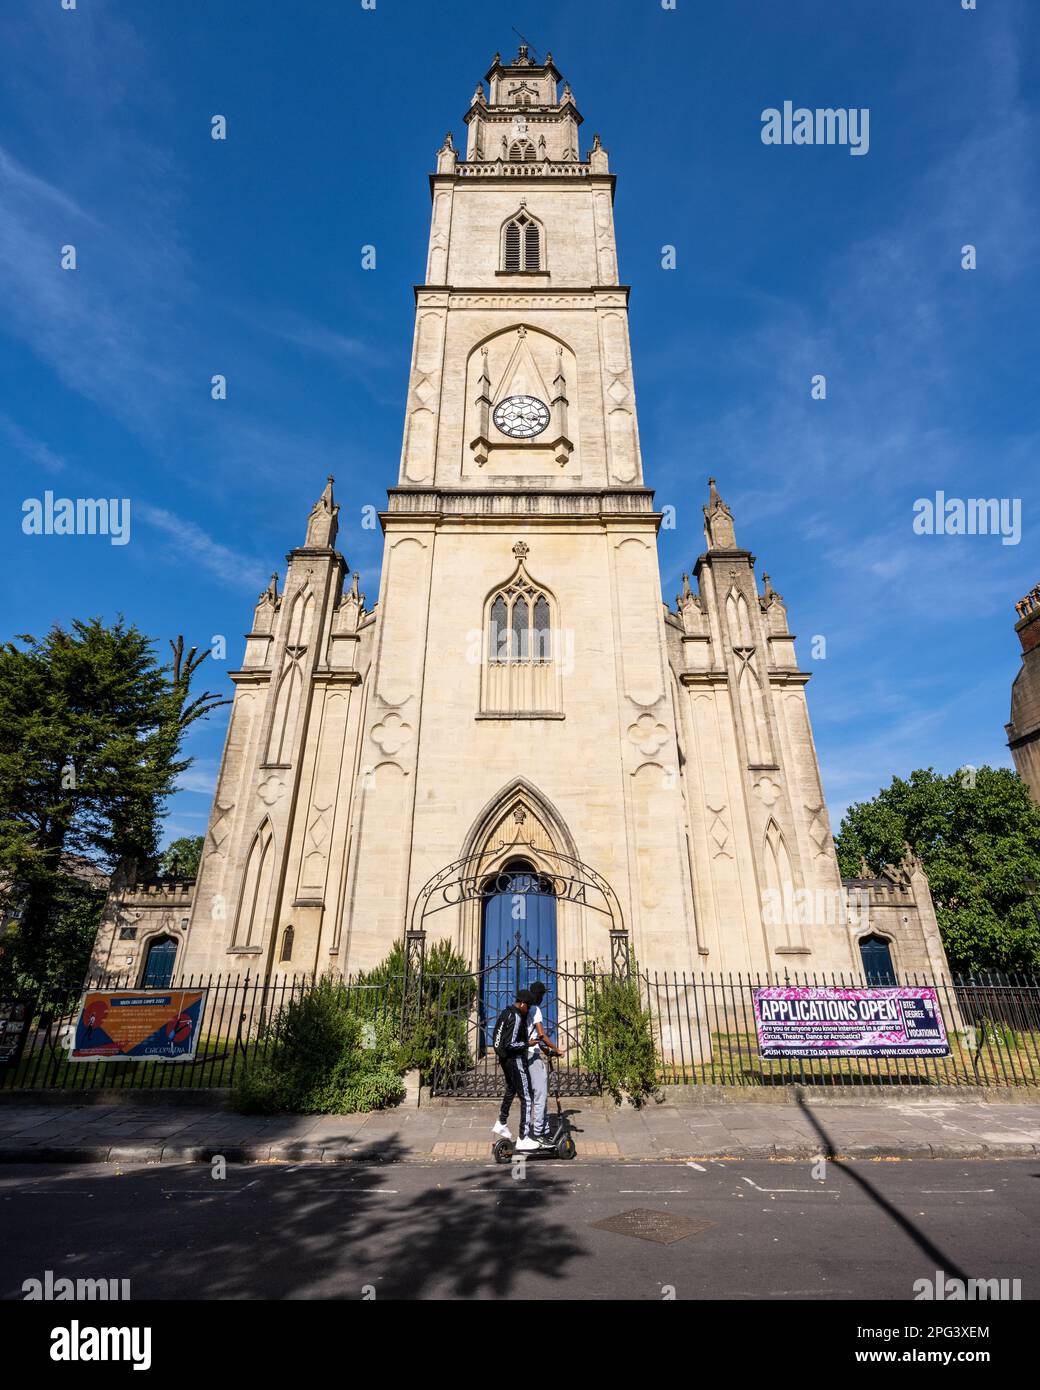 Sun shines on the tower of St Paul's Church in inner city Bristol, England. Stock Photo